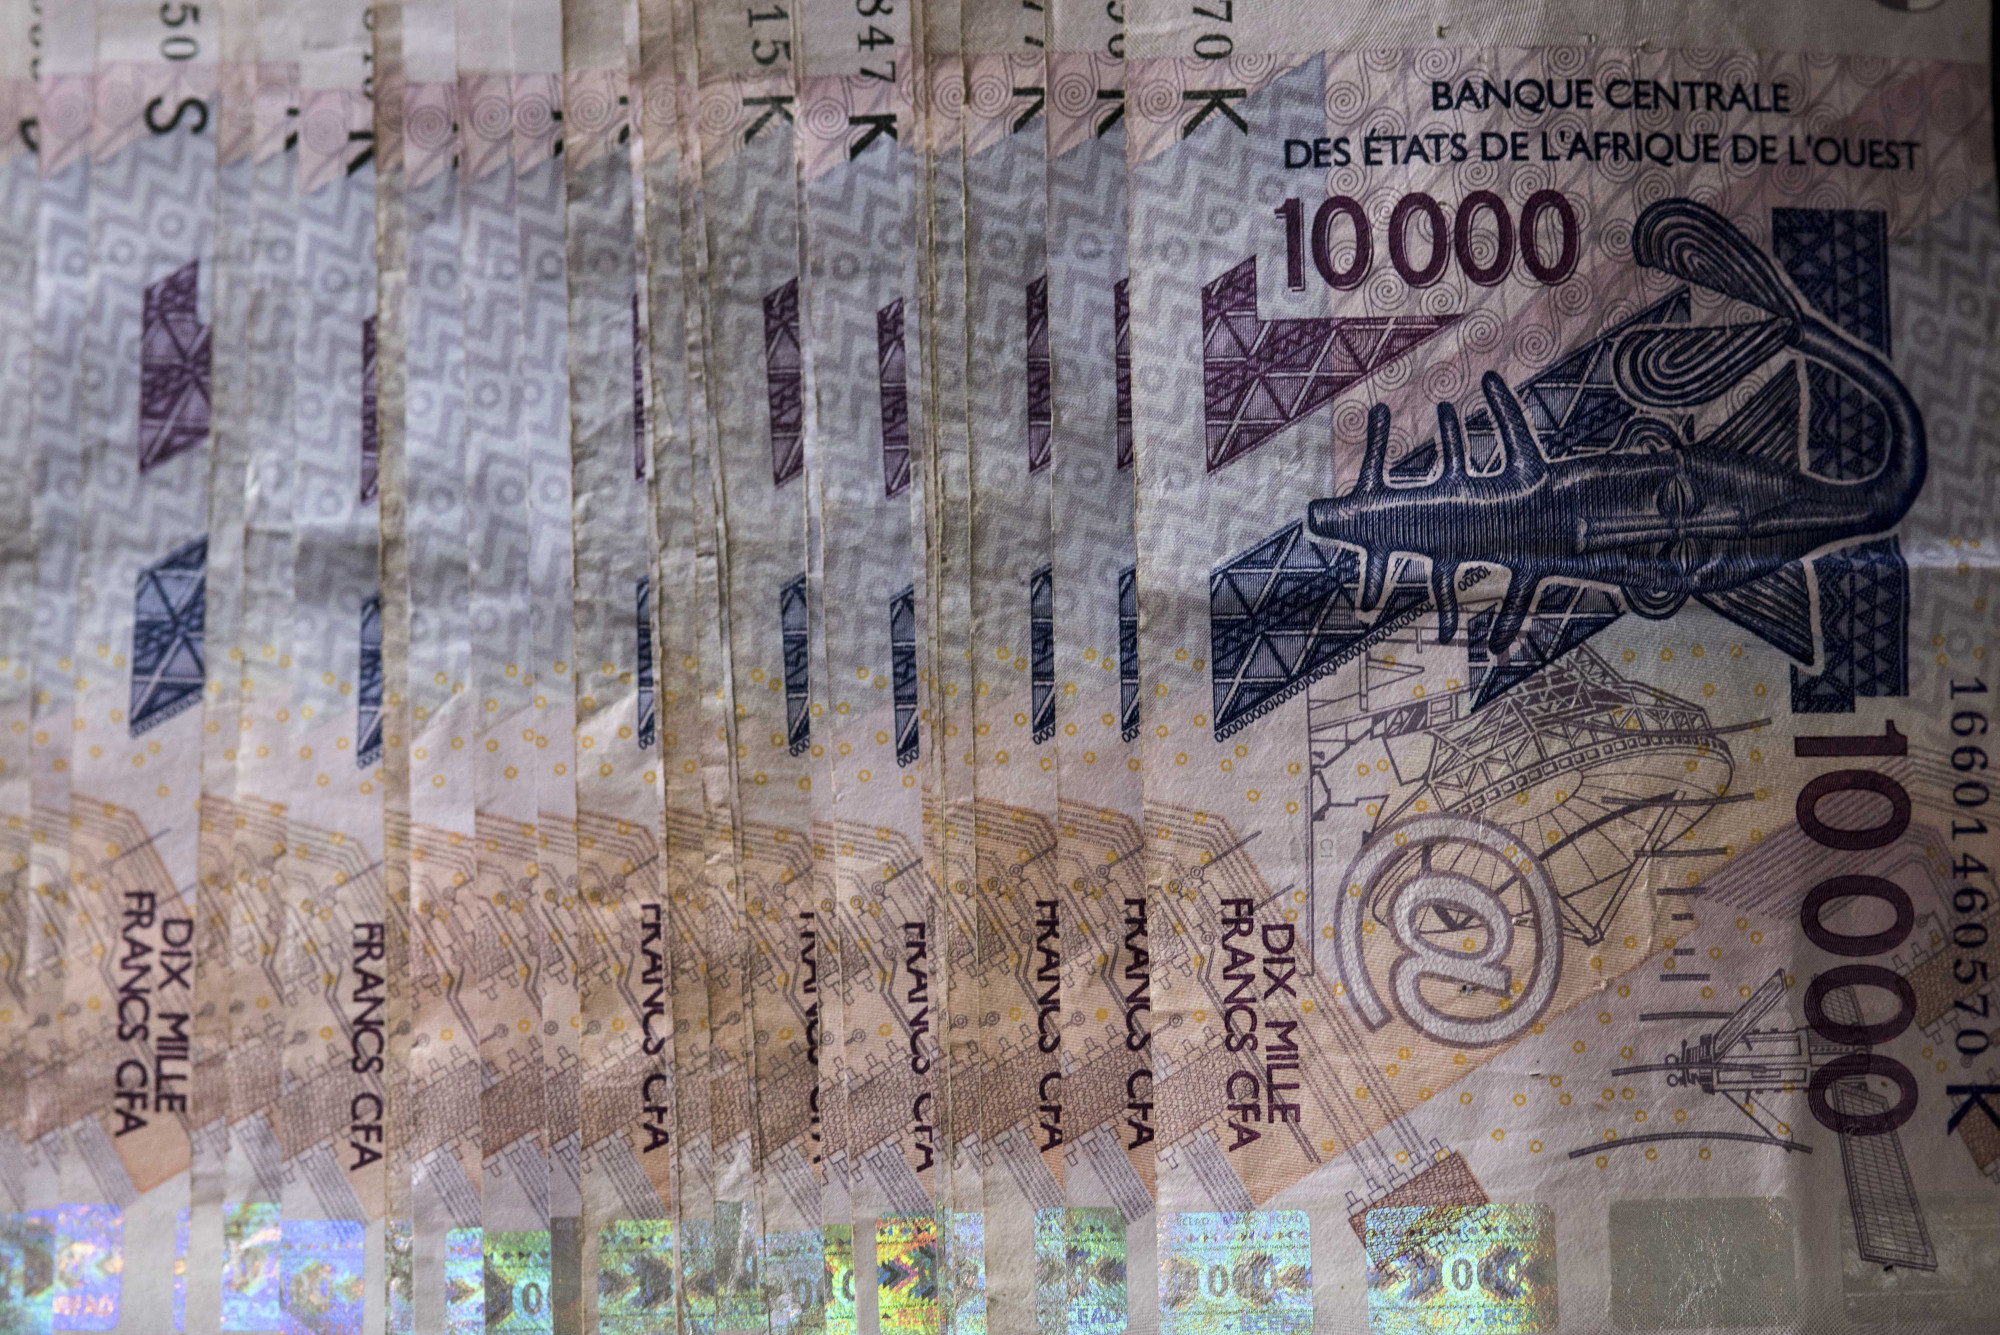 West African CFA franc currency banknotes.